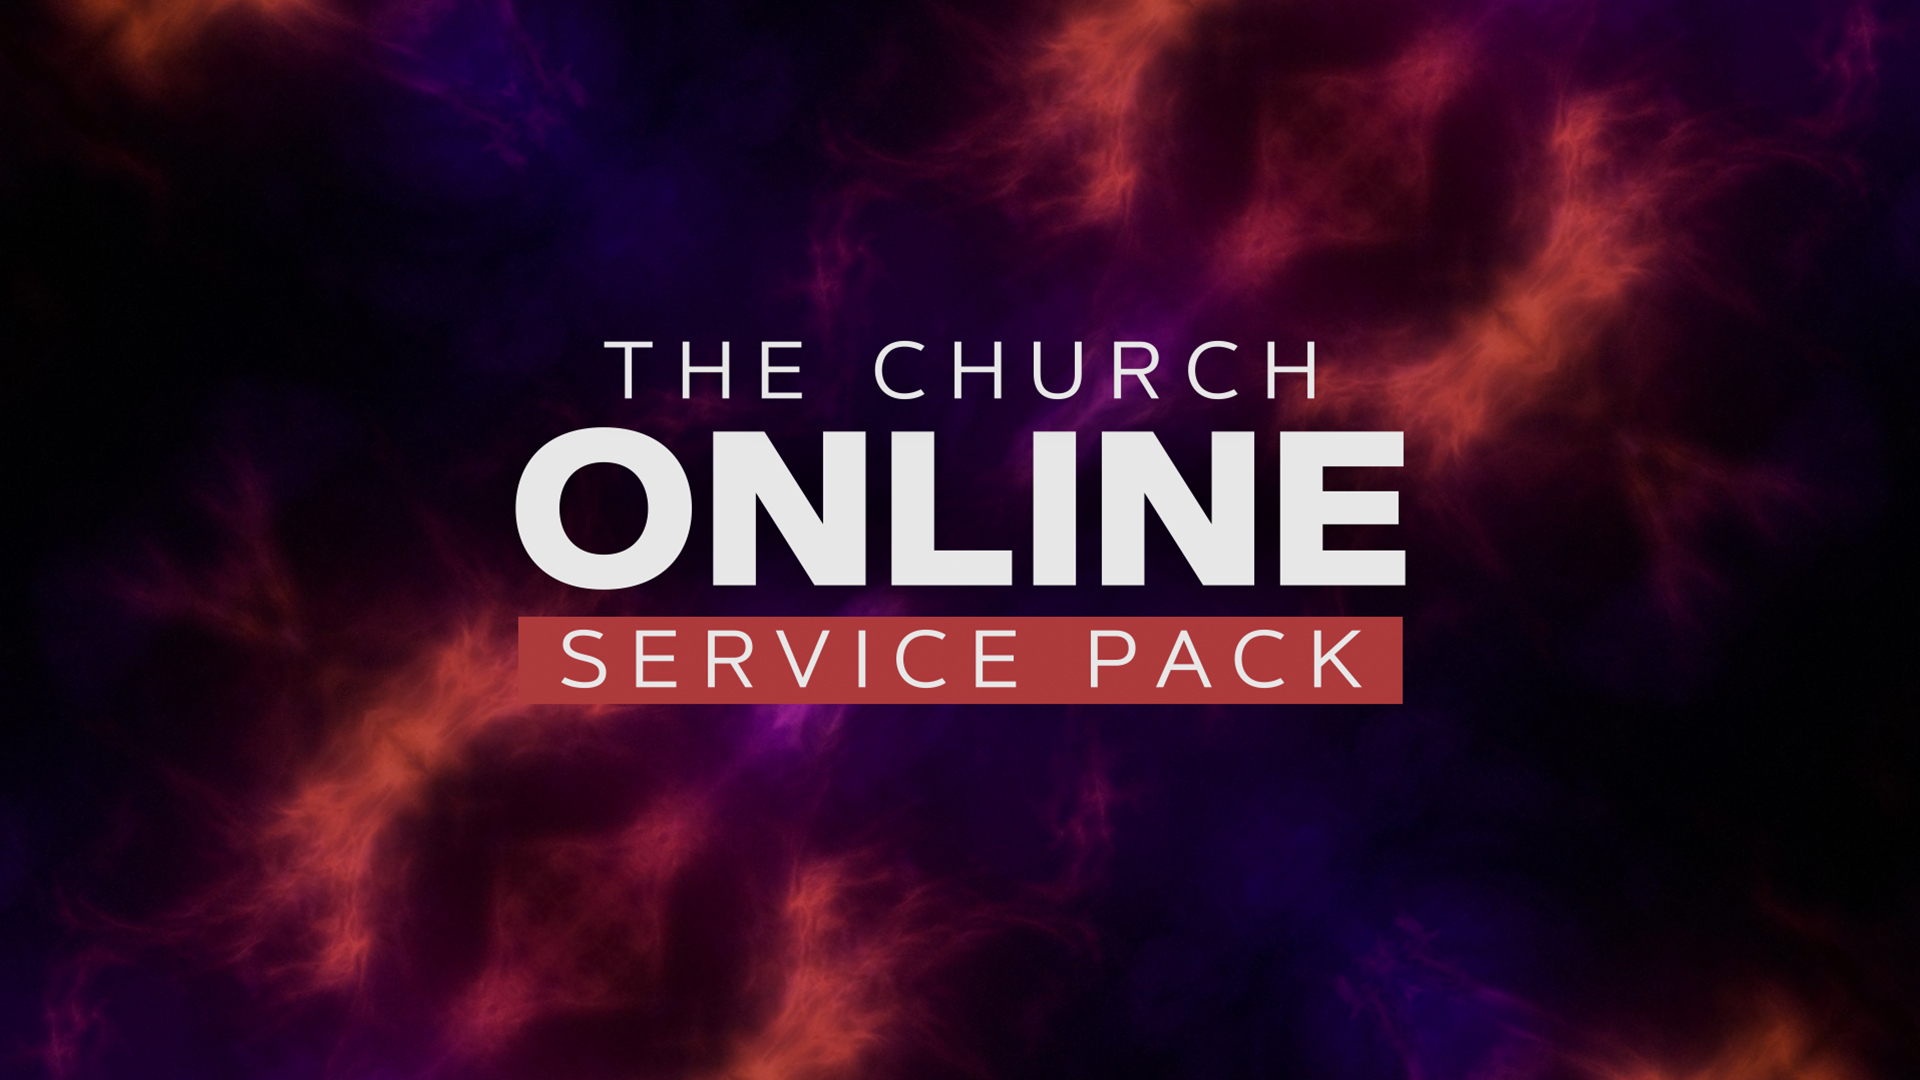 The Church Online Service Pack